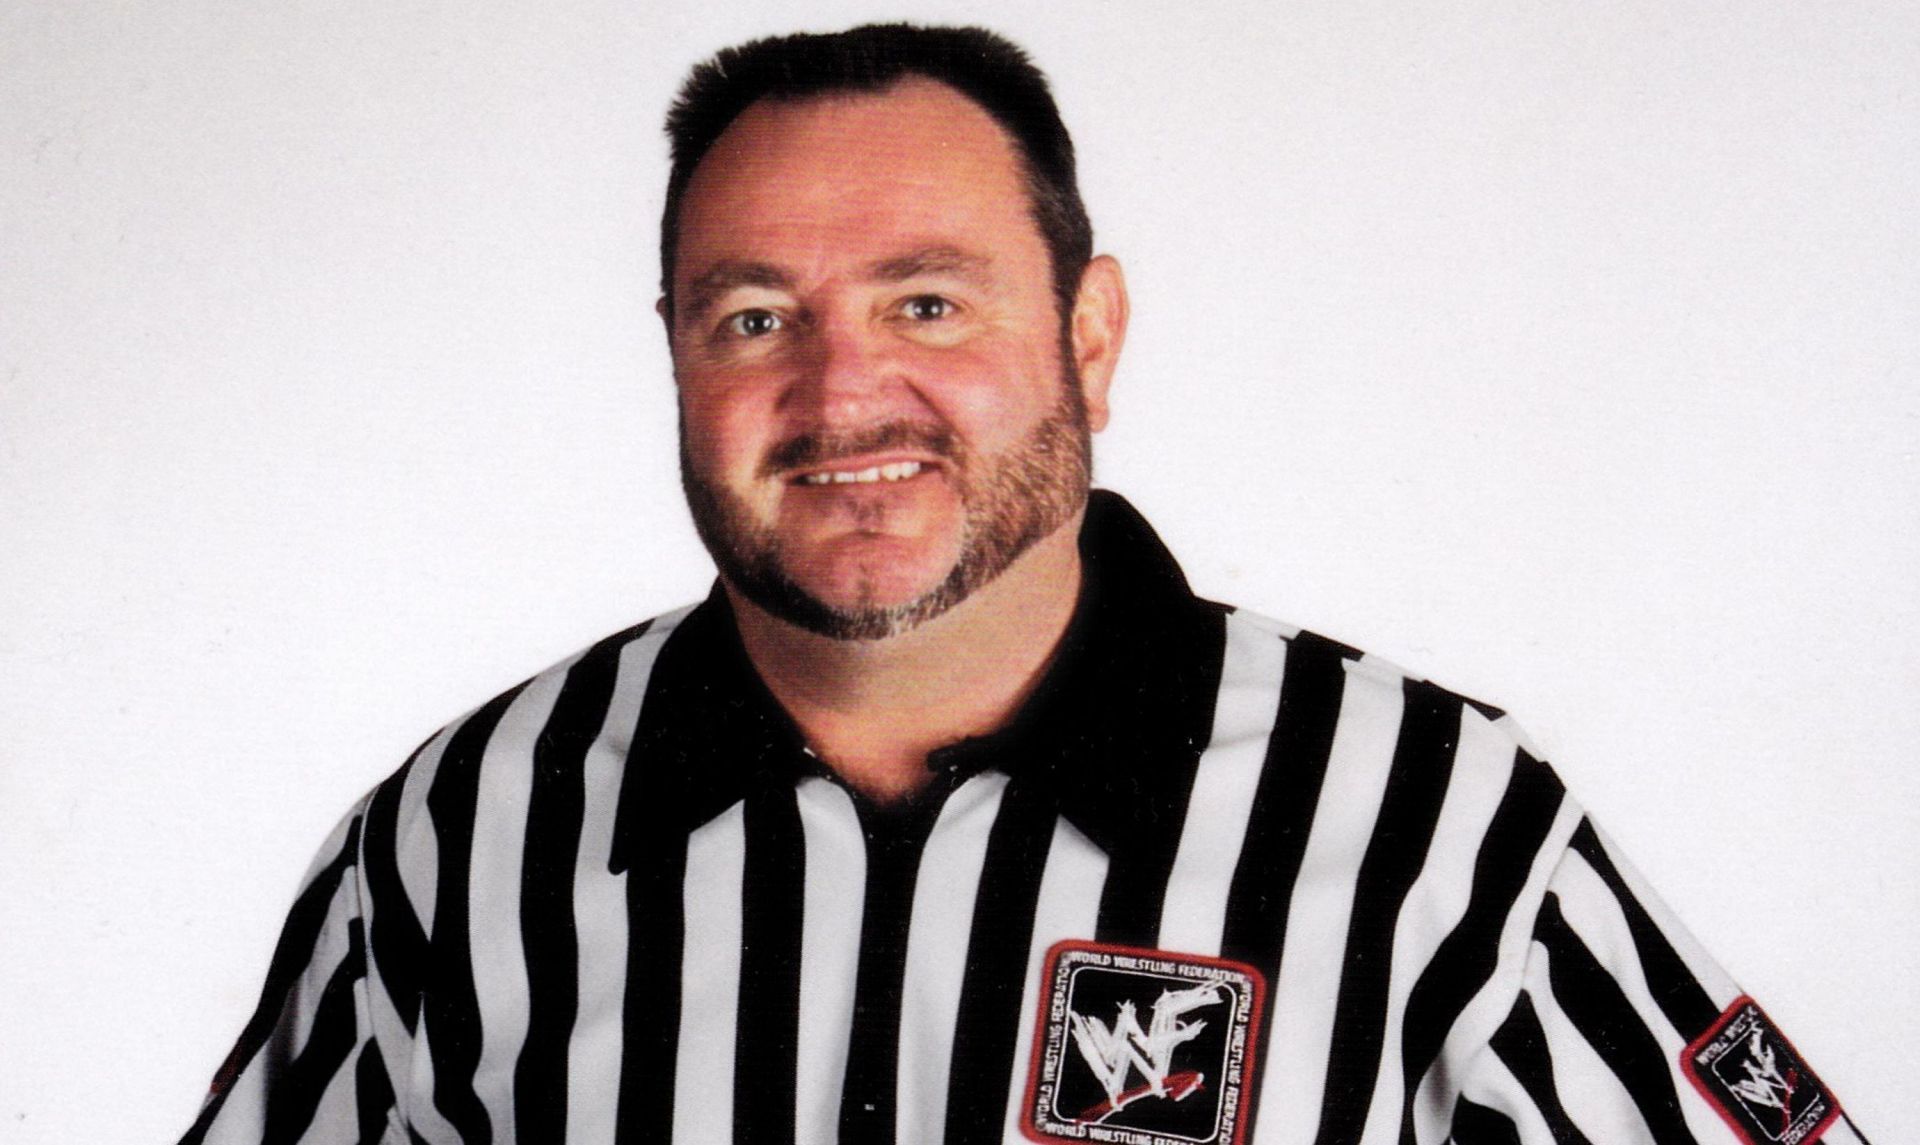 Tim White worked with WWE from 1985 to 2009